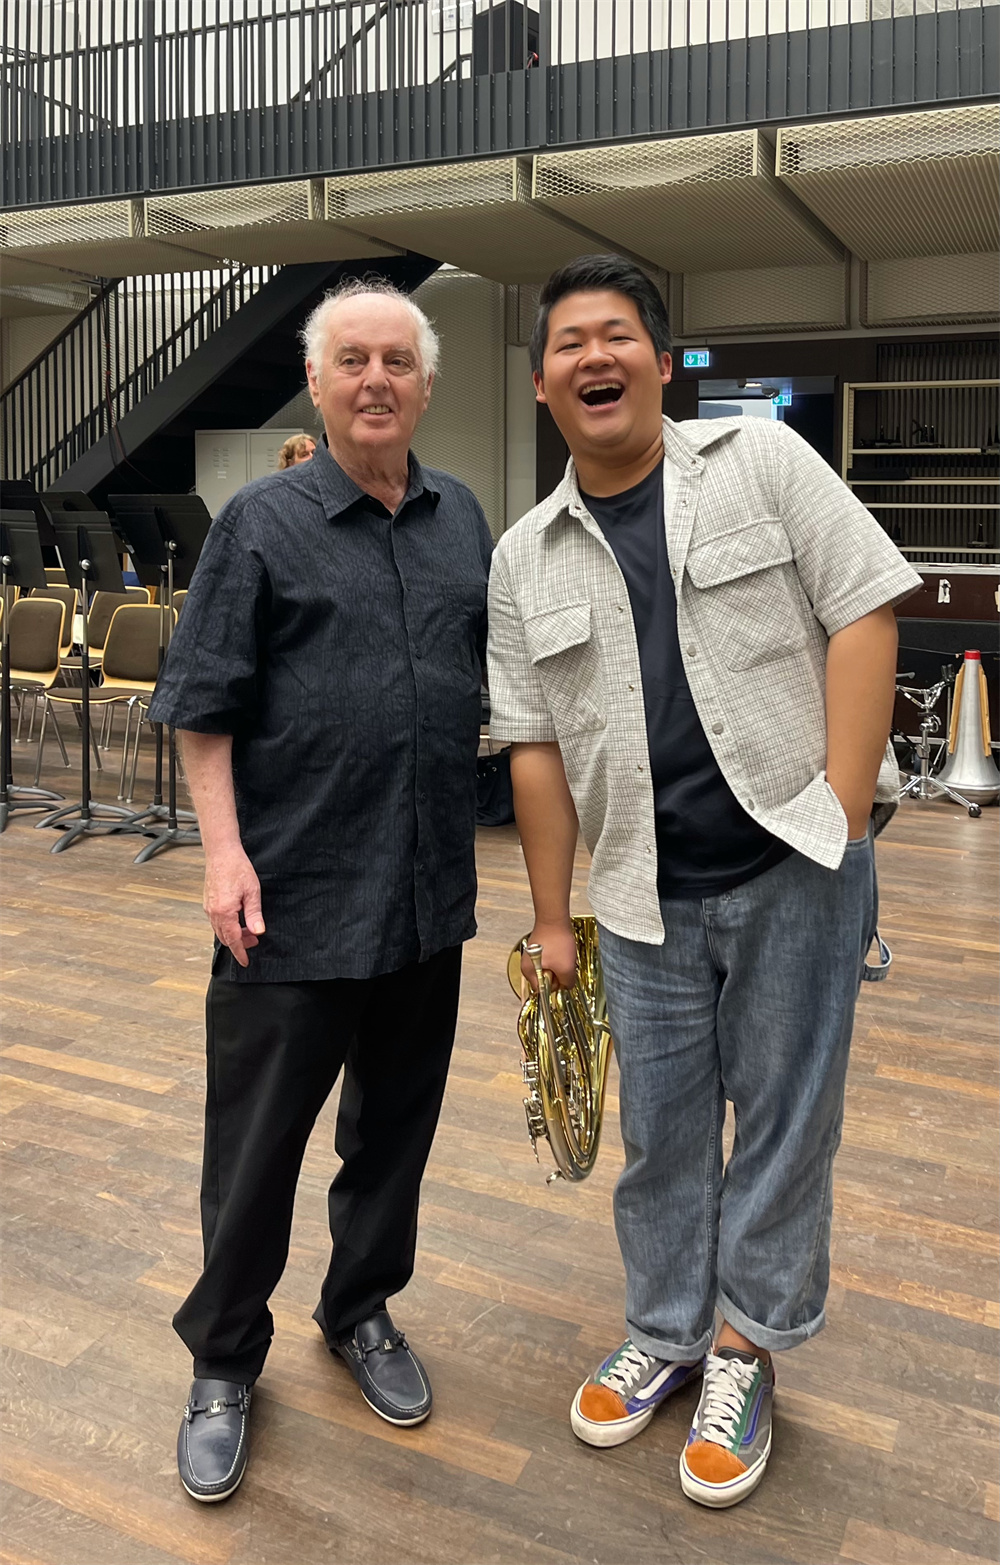 After the rehearsal, Zeng Yun and Barenboim took a group photo.